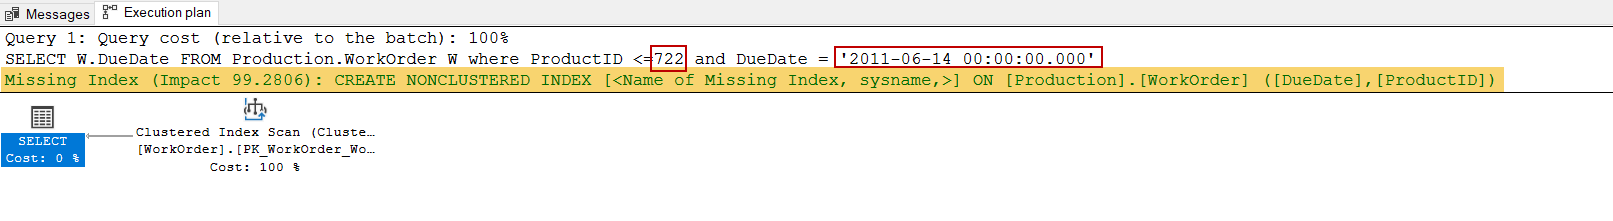 SQL Server and missing index in the execution plan